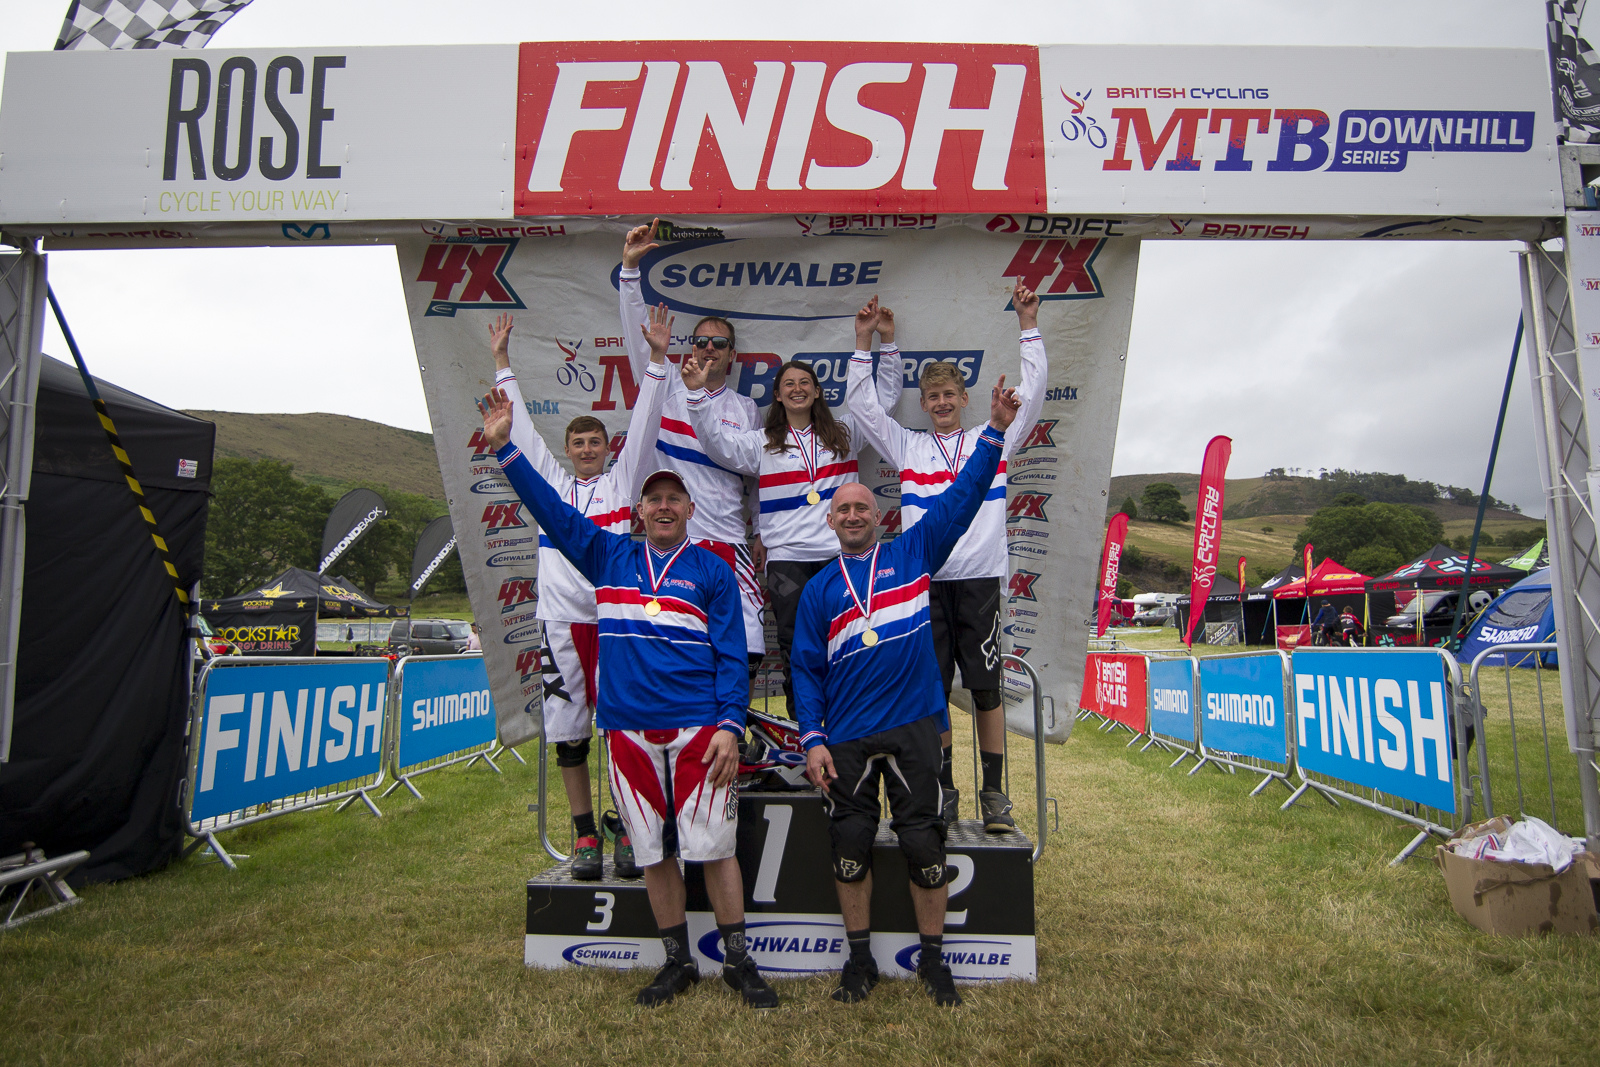 Your 2015 British 4X National Champions during The Schwalbe British 4X National Championship at Moelfre Hall, Moelfre, United Kingdom. 11July,2015 Photo: Charles Robertson